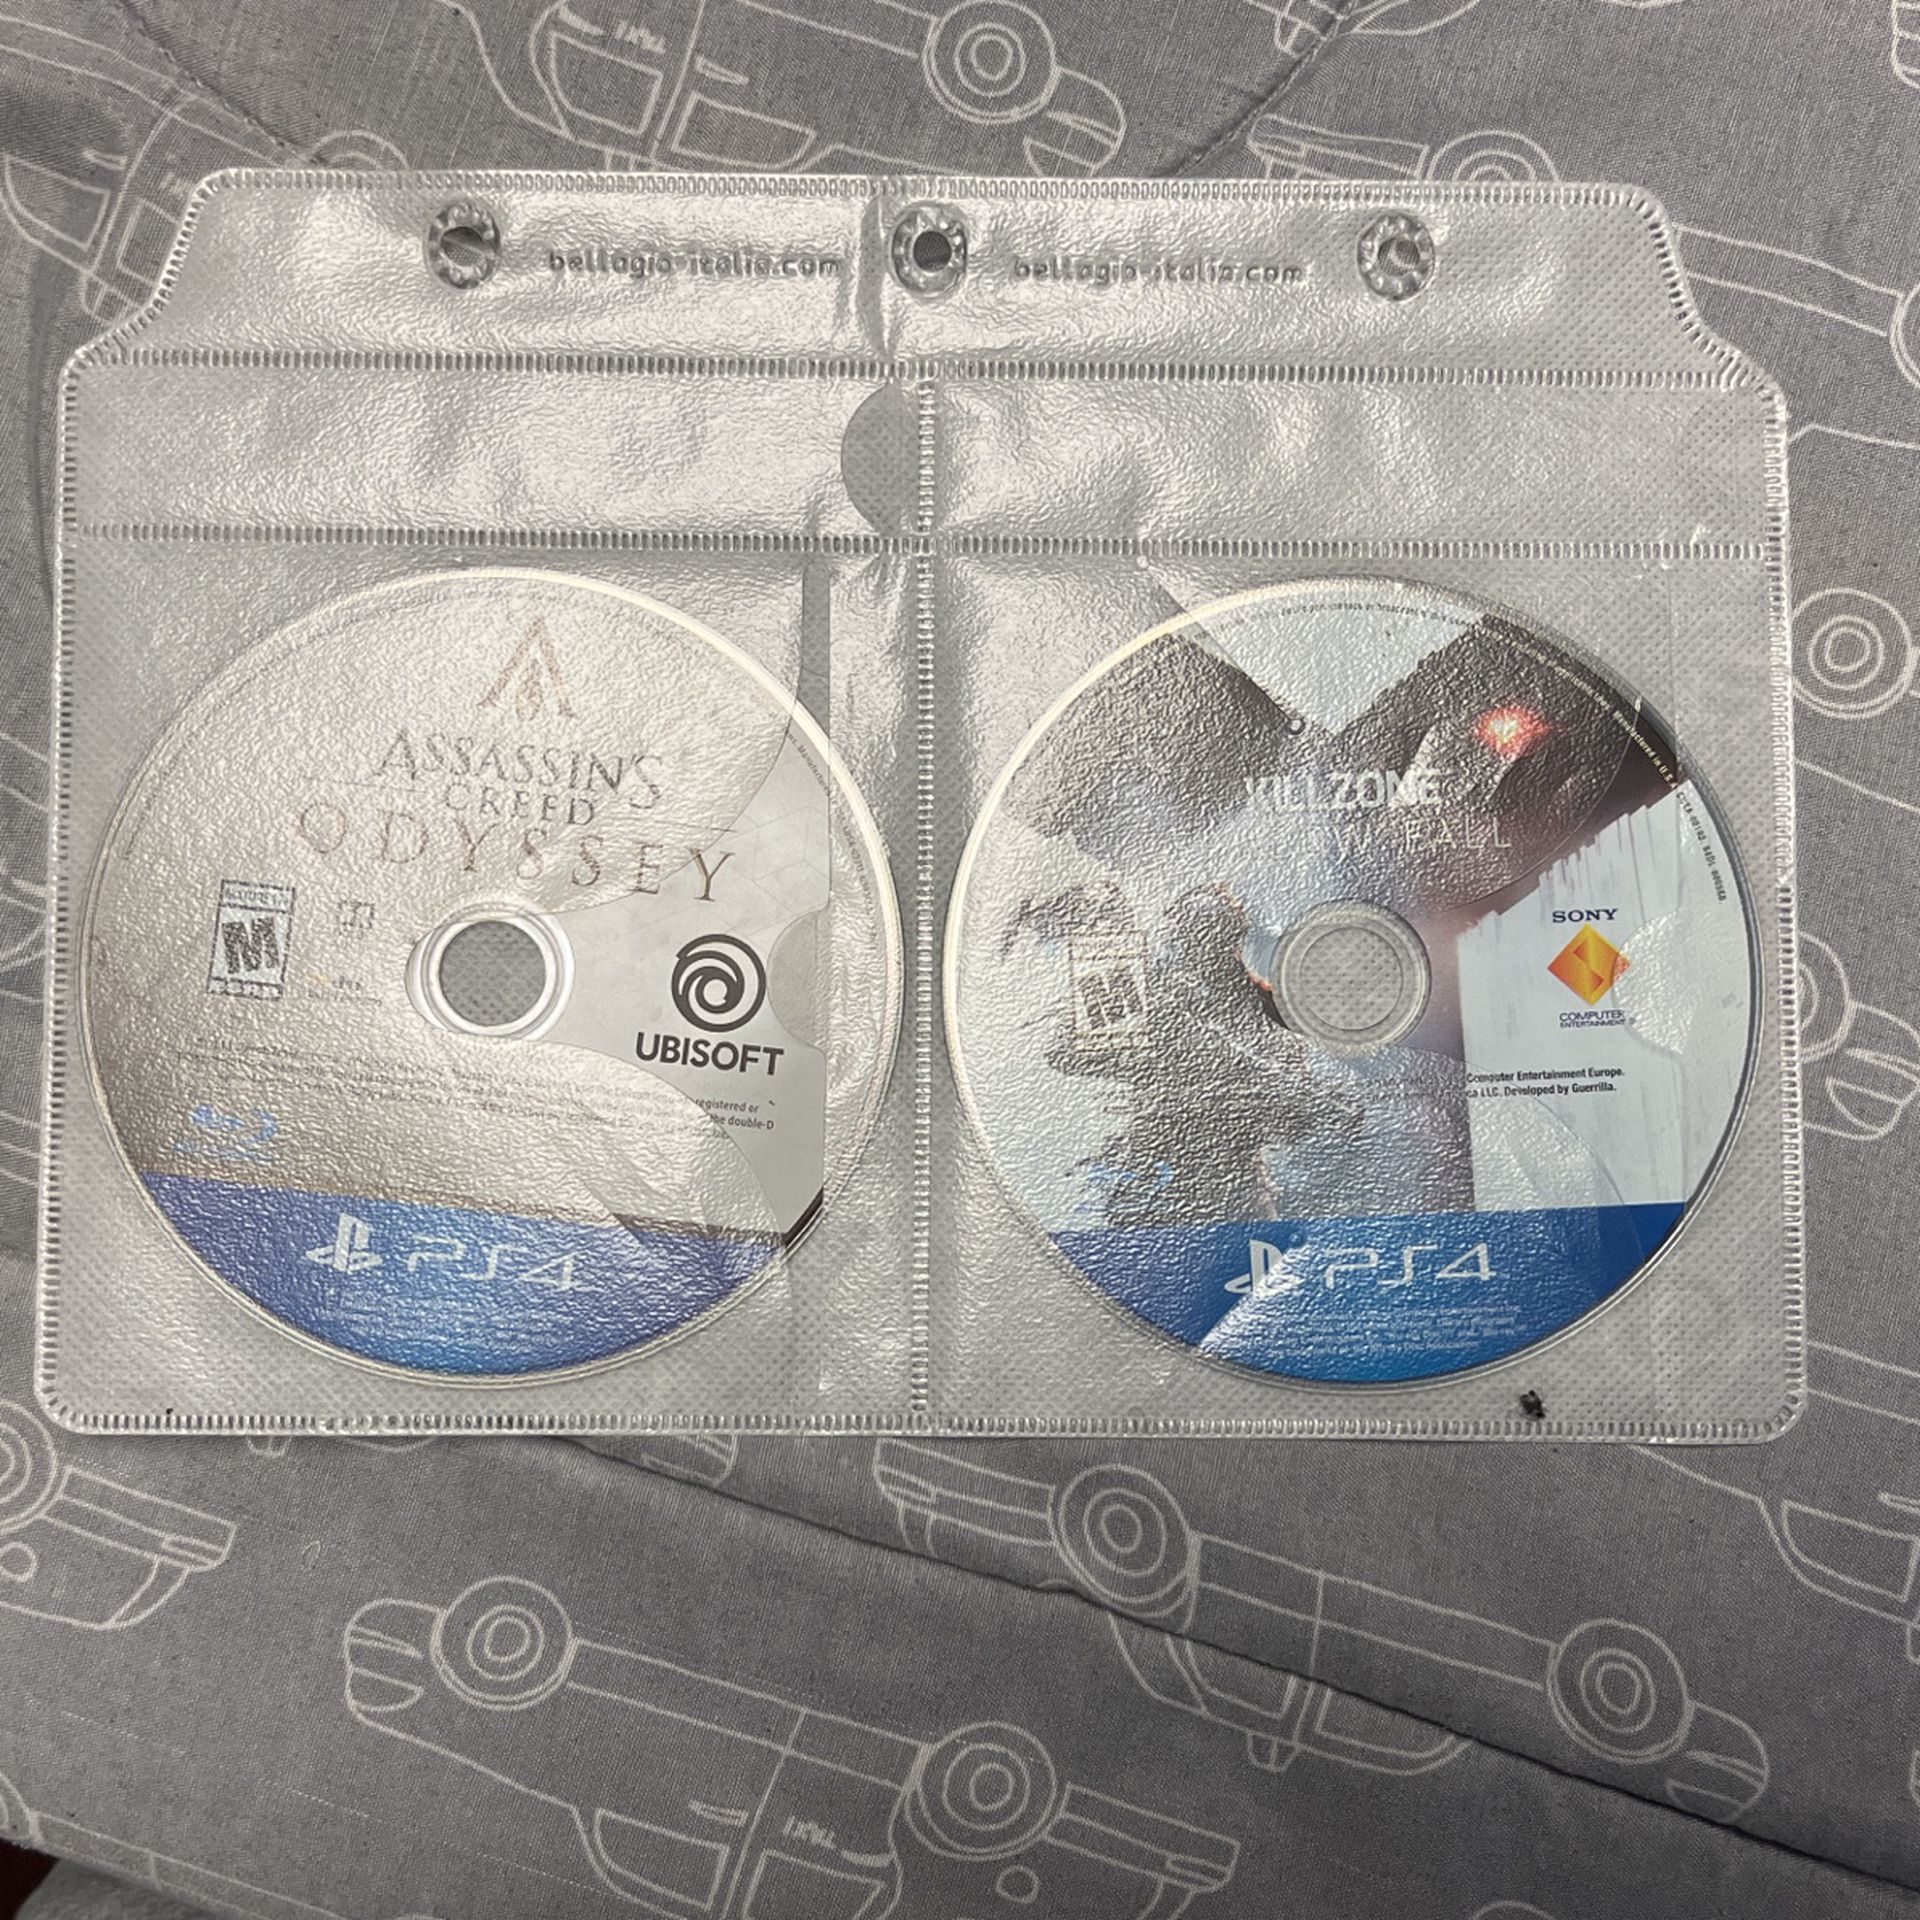 Two PS4 Games Brand New, Used Only Once And Dropped Beachside I Didn’t Liked